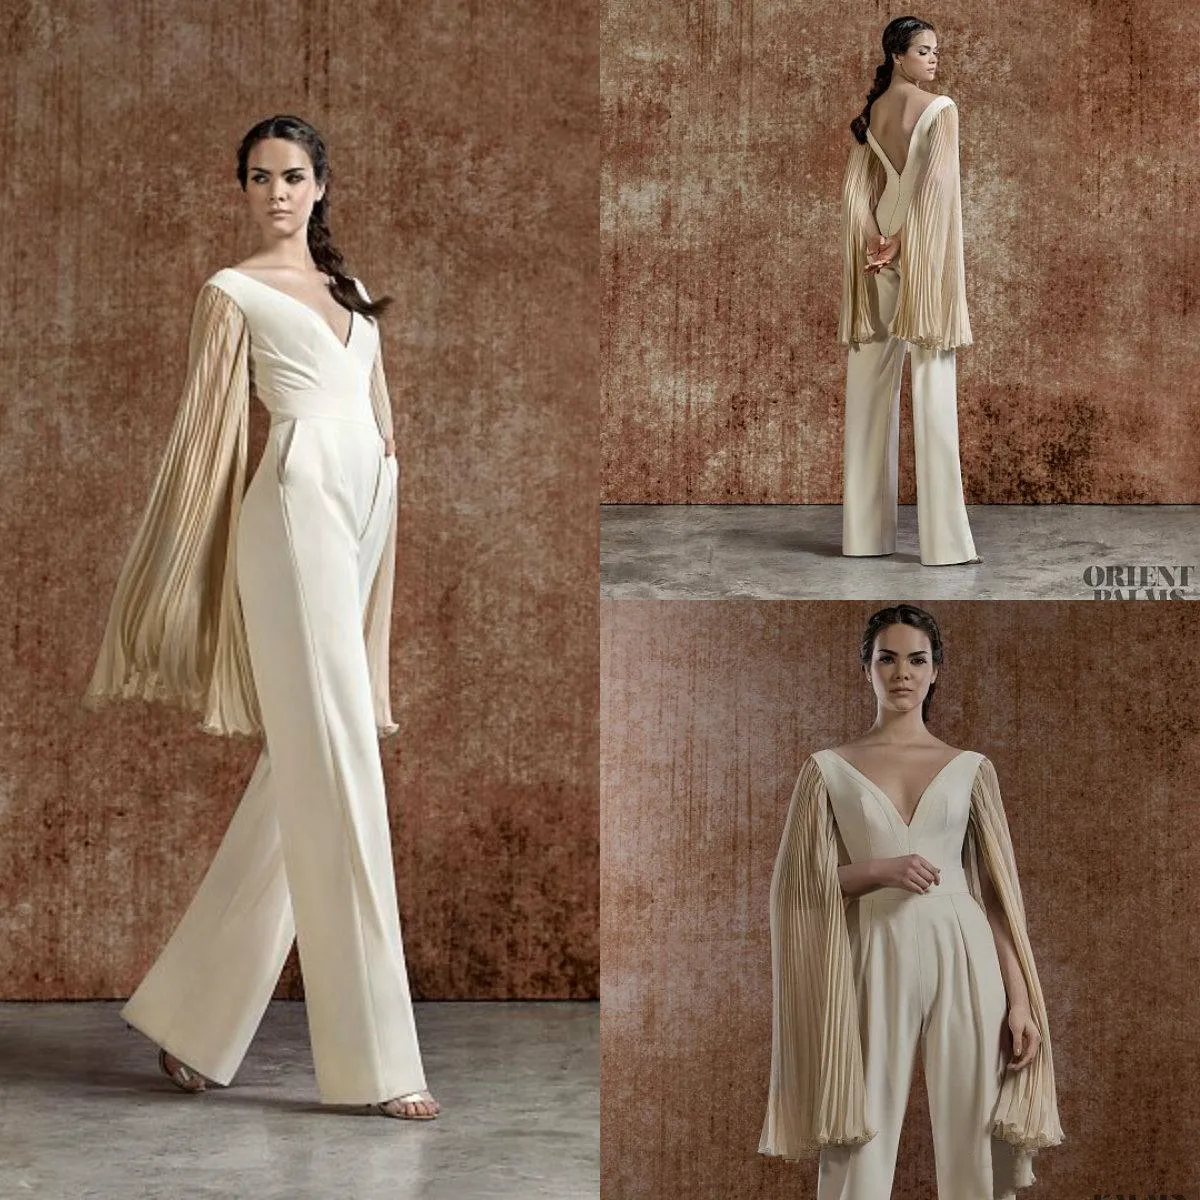 Champagne Satin Jumpsuit Formal Jumpsuits For Prom With V Neck, Long Sleeves,  Pockets, And Evening Gown From Manweisi, $102.65